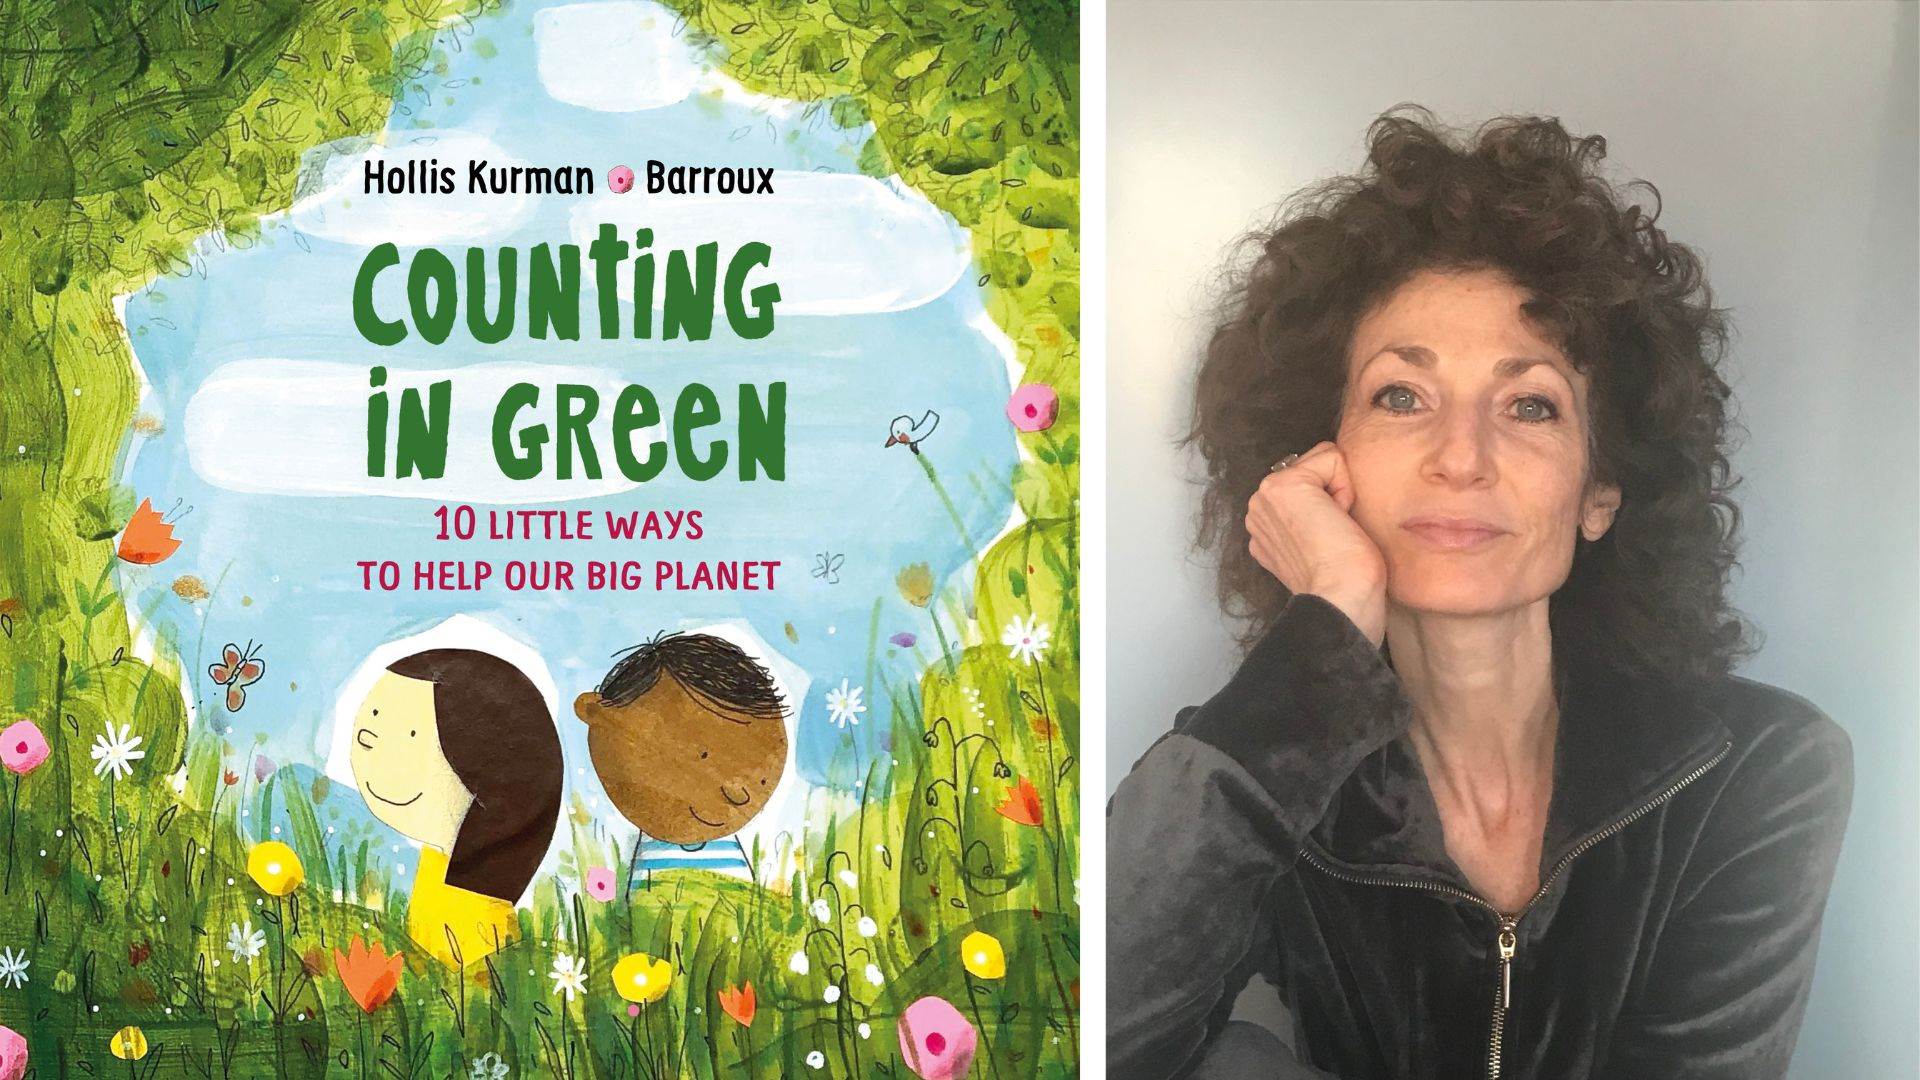 Author Hollis Kurman and the cover of Counting in Green